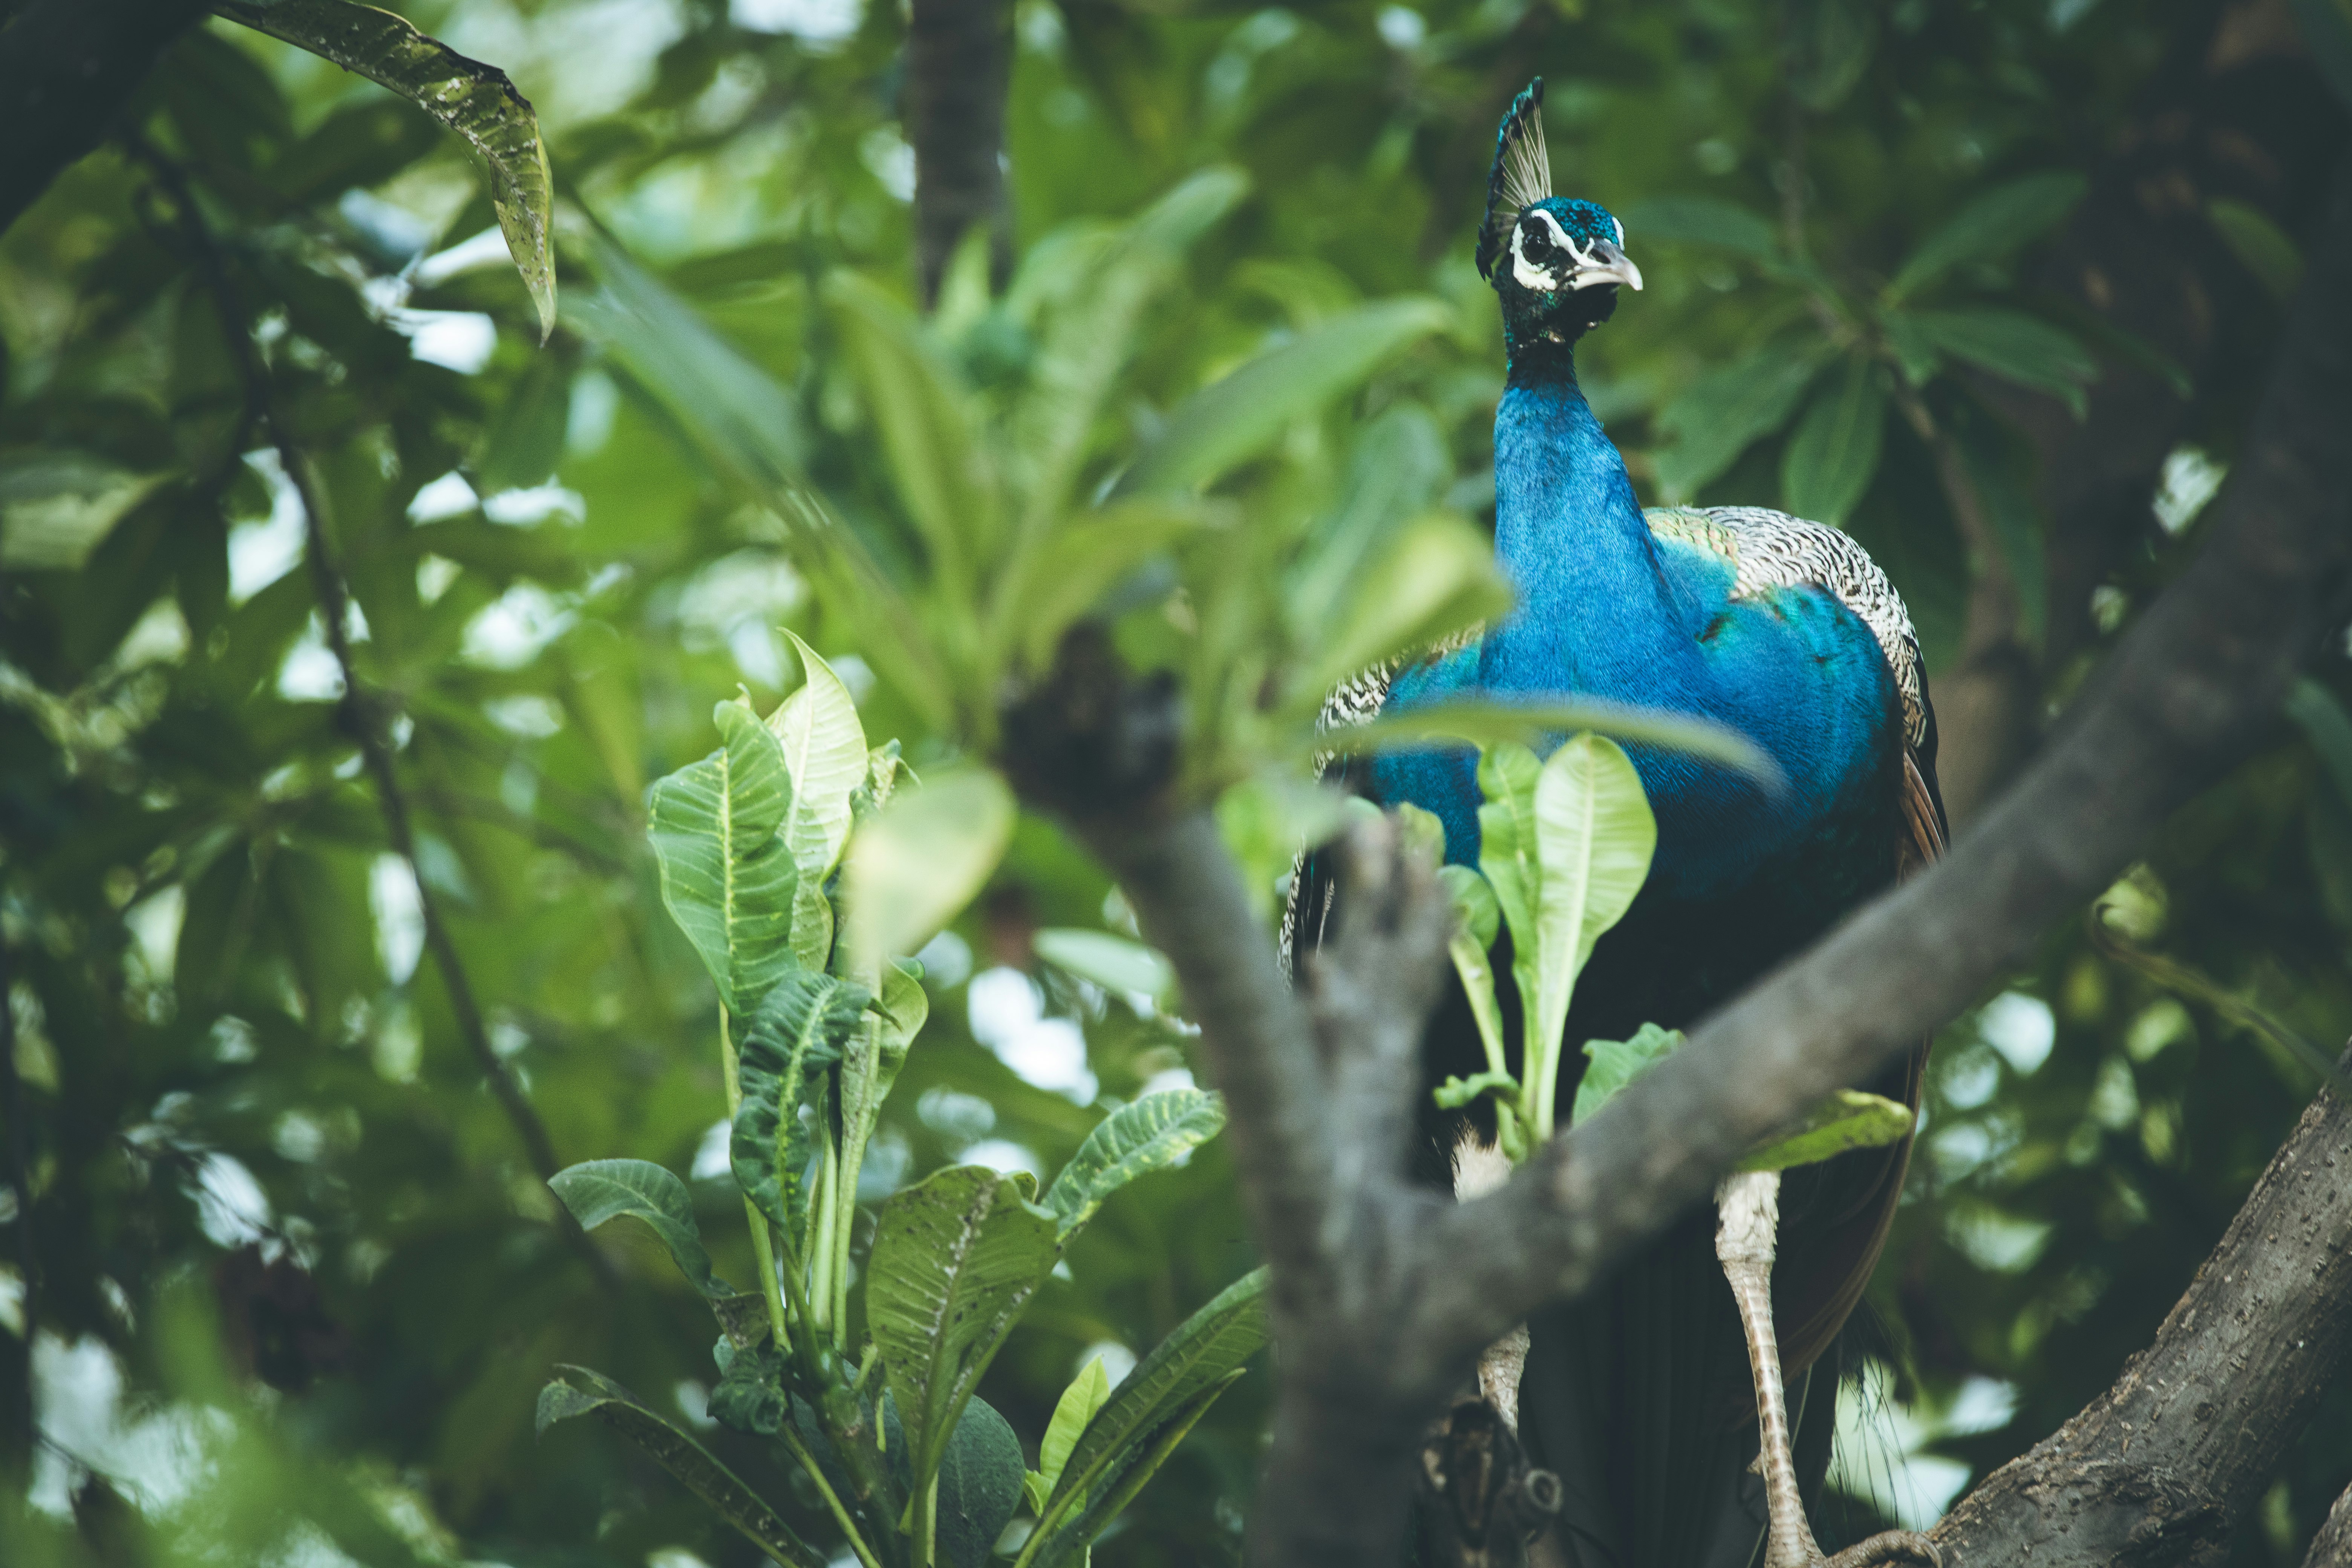 blue peacock on tree branch during daytime